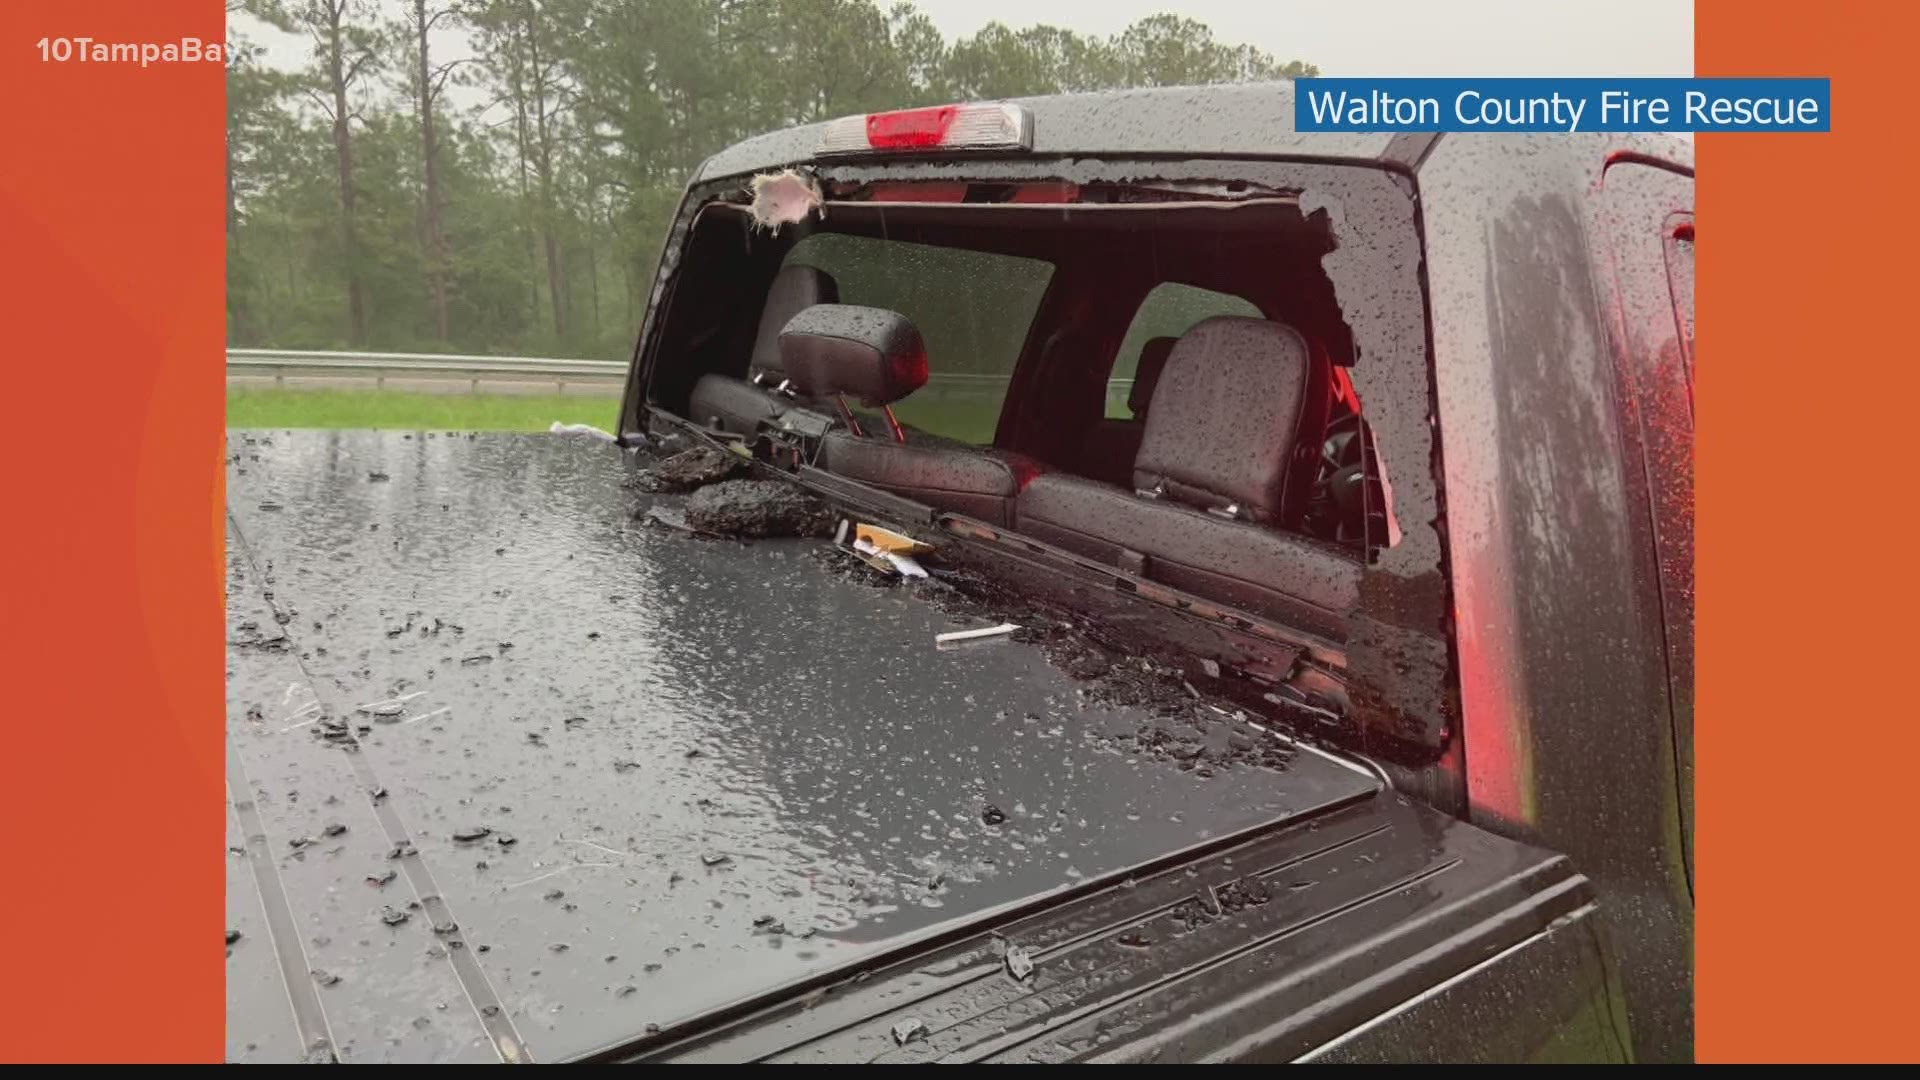 Walton County Fire Rescue crews discovered lightning had struck the interstate, causing a chunk of the roadway to fly right through the windshield of a pickup truck.